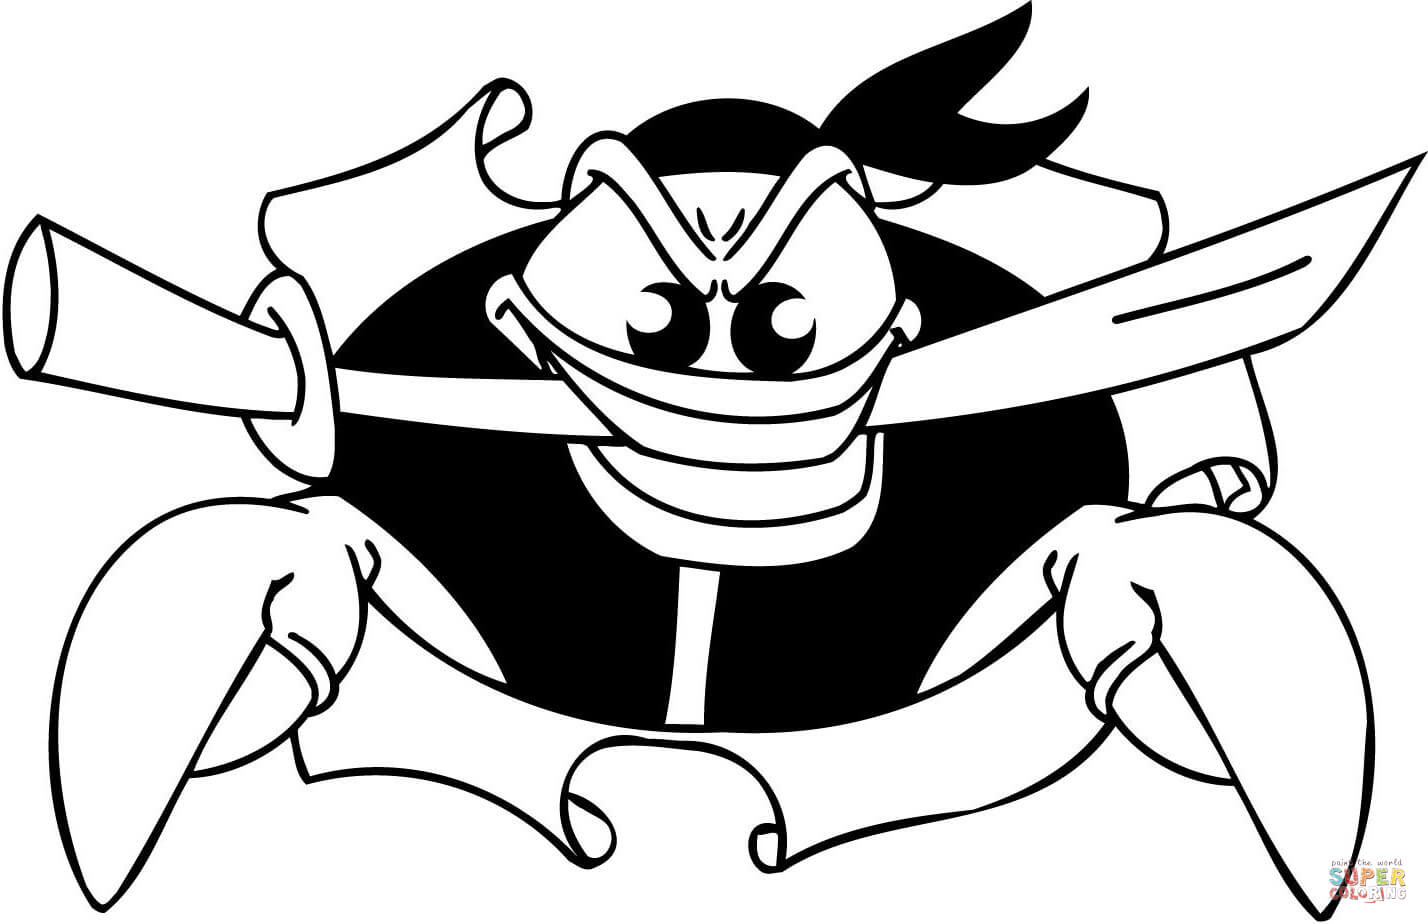 Pirate Crab with a Sword in the Mouth coloring page | Free ...